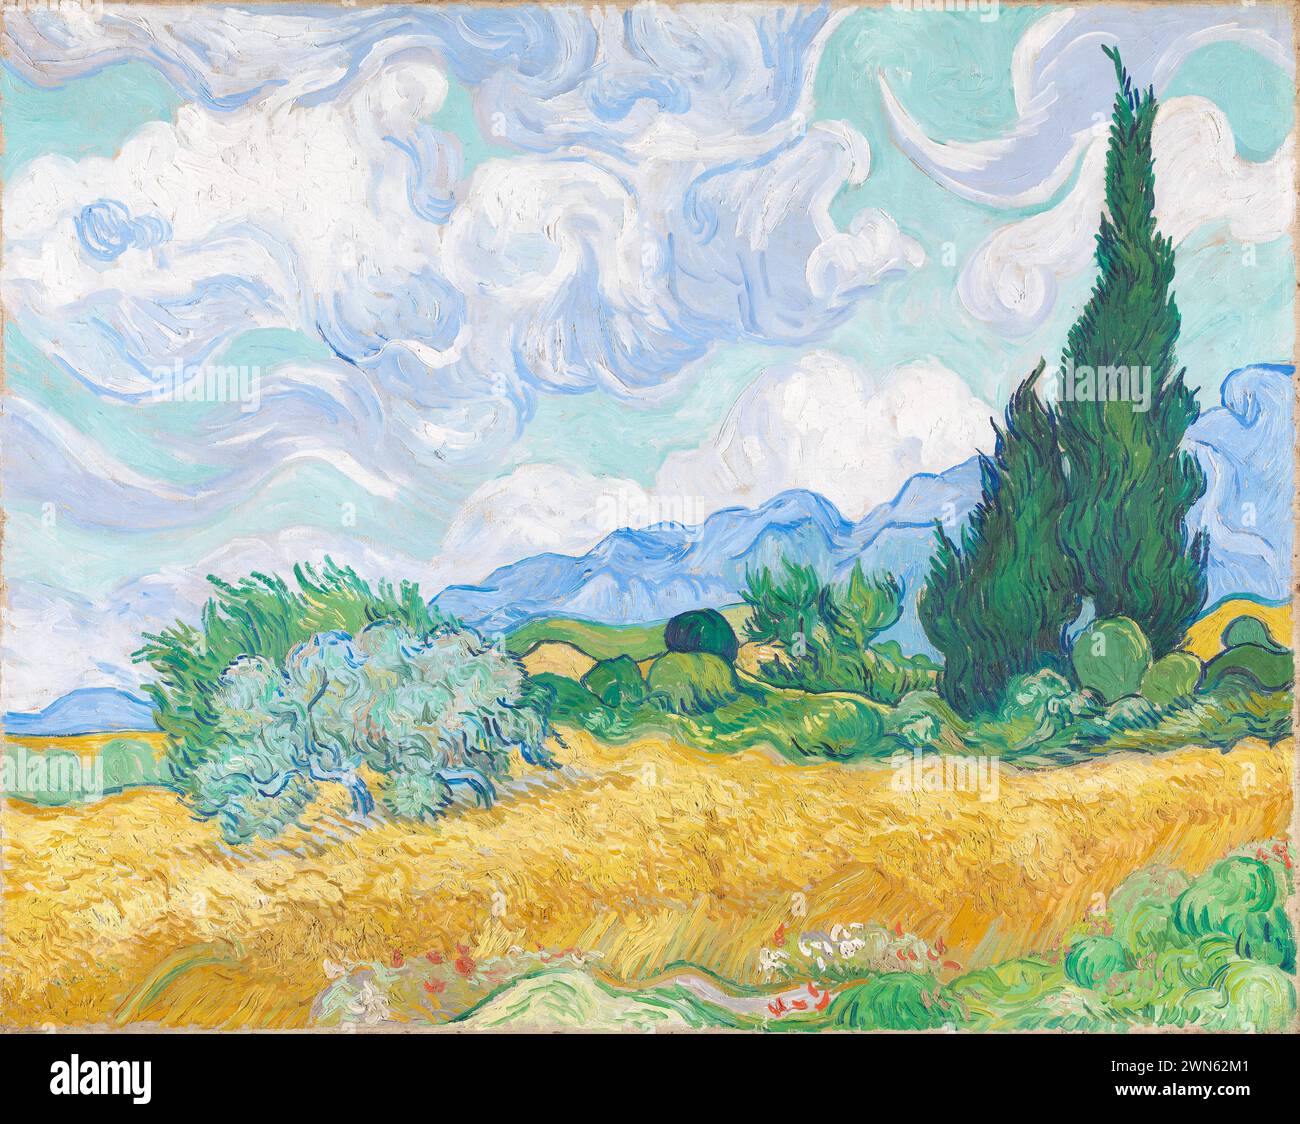 Van Gogh Vincent - A Wheatfield with Cypresses (1889) Stock Photo